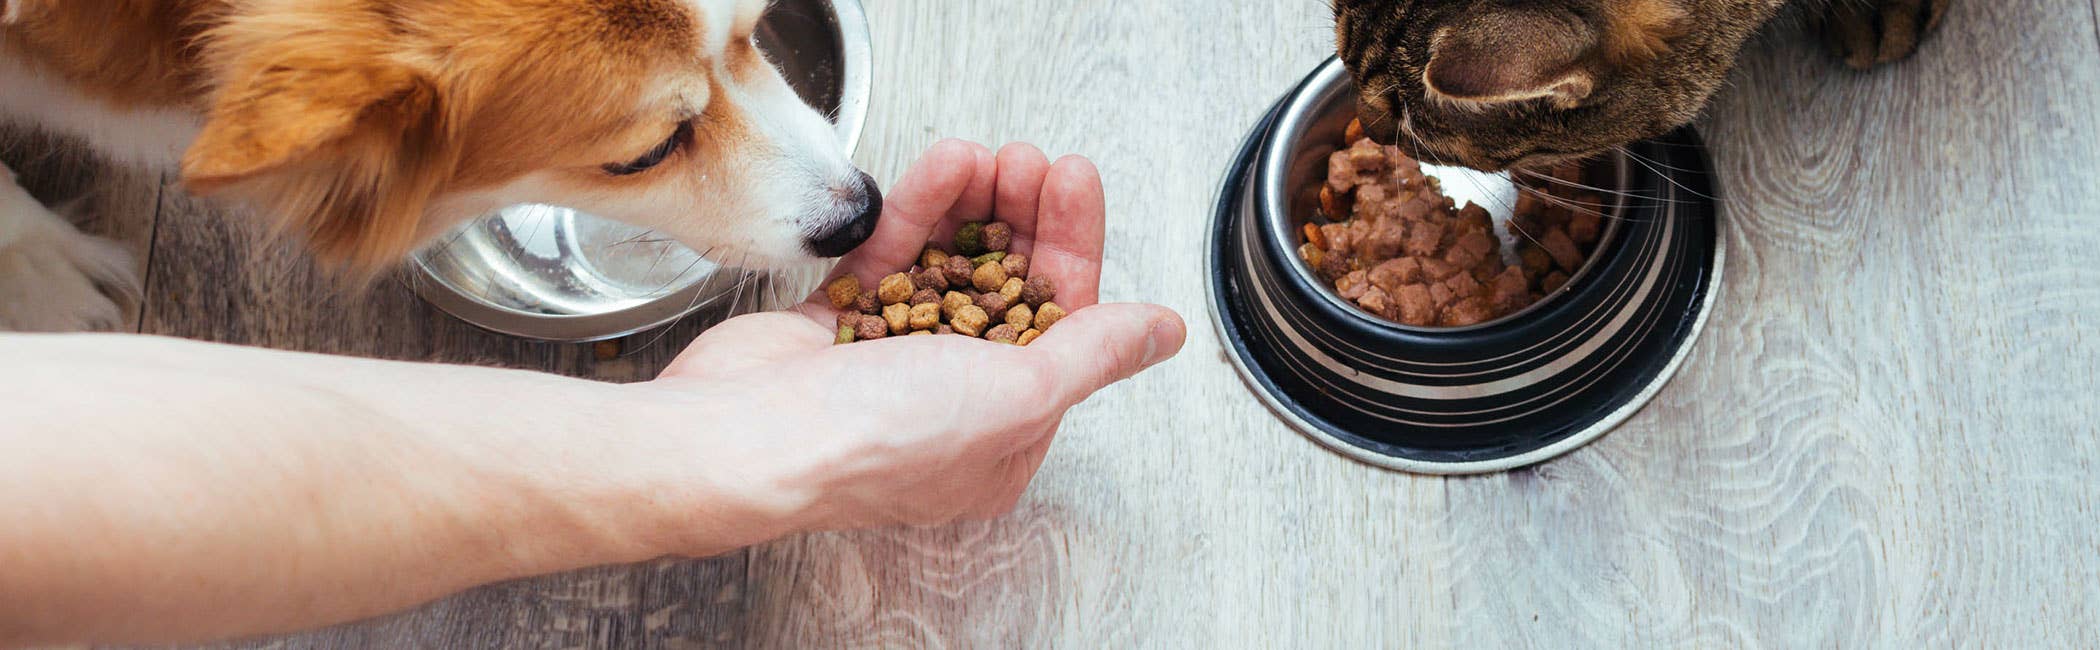 How to Start a Pet Food Business | Regulations & Advice